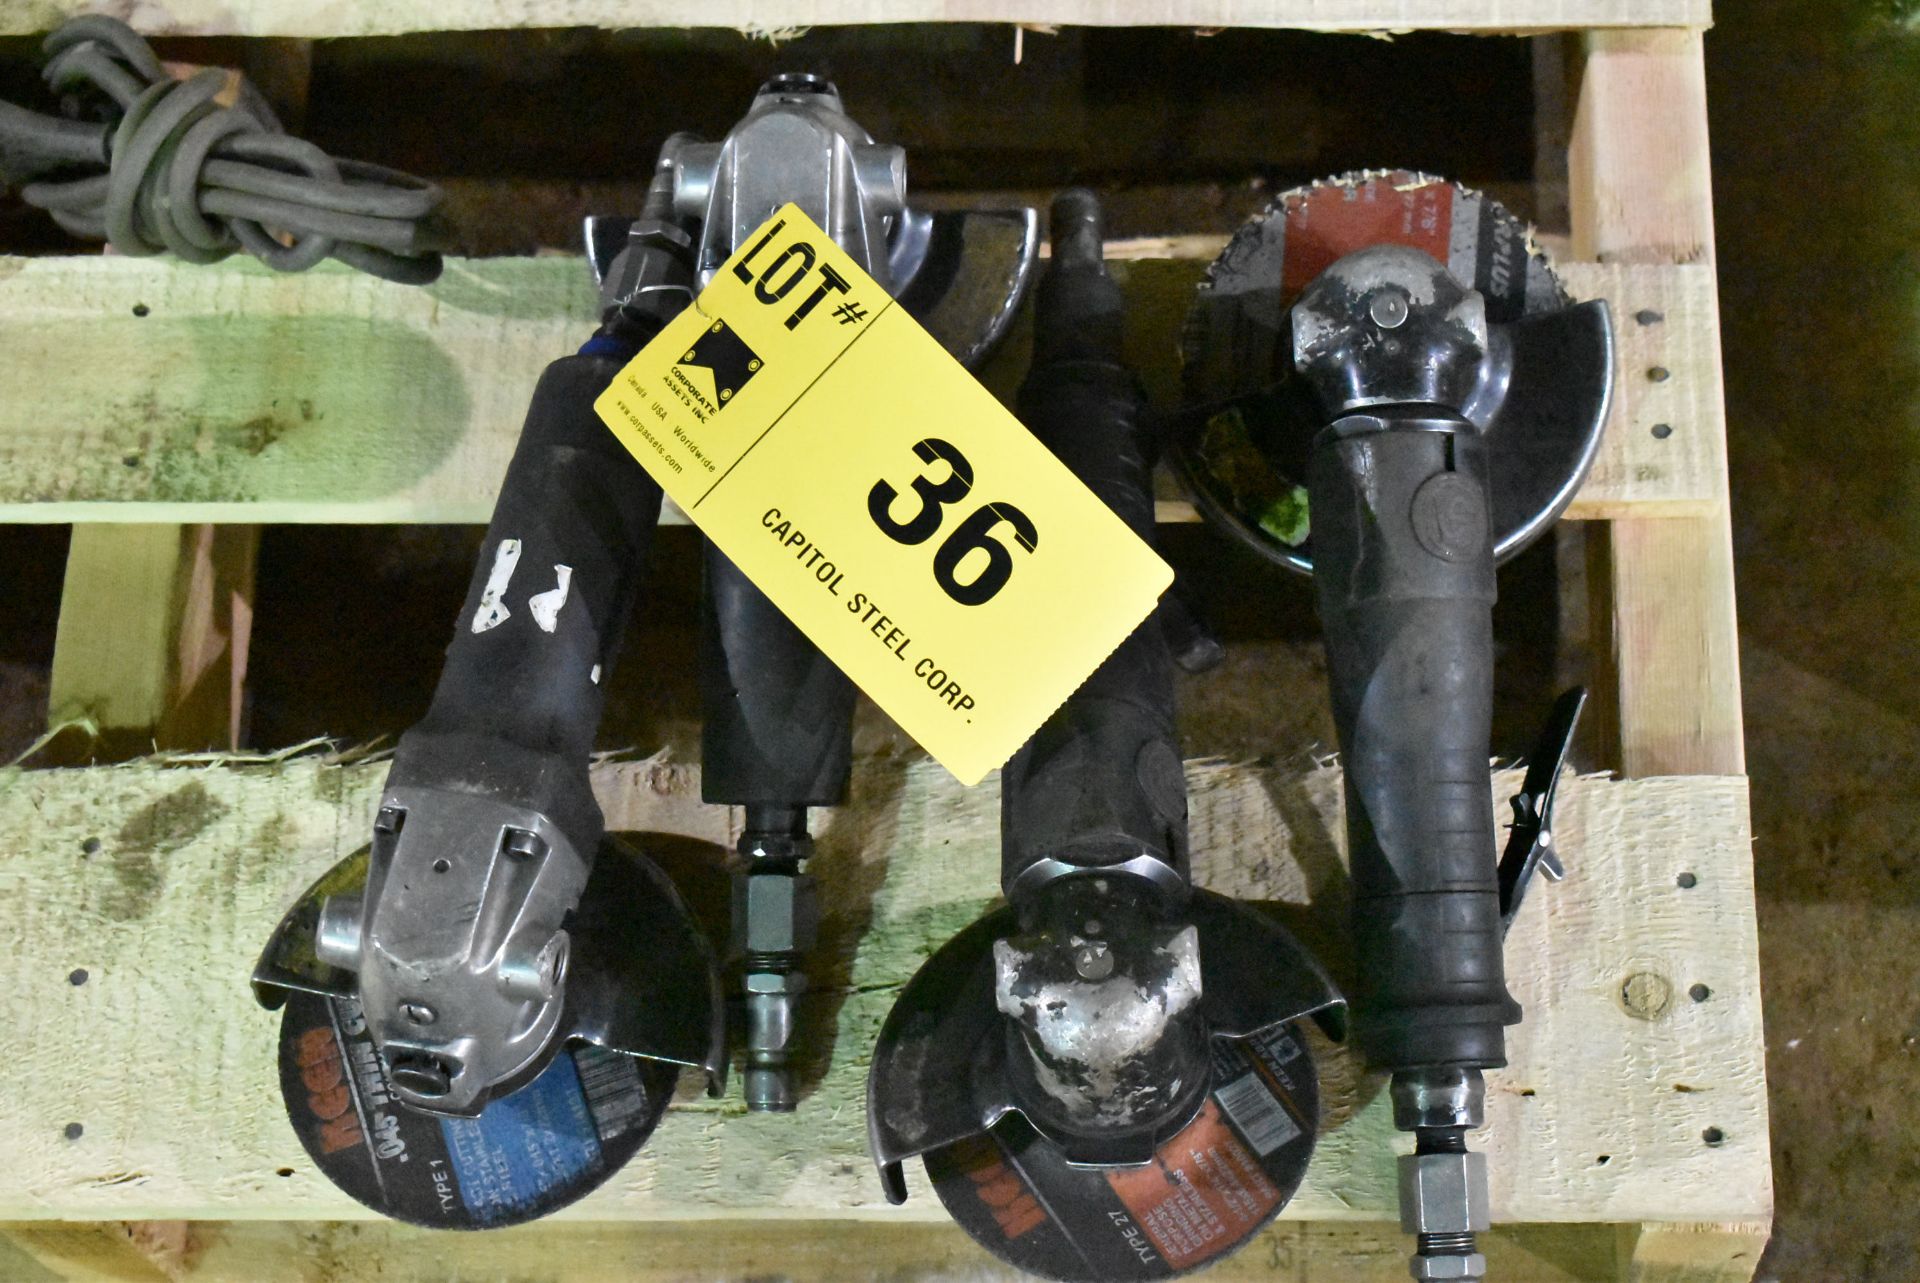 LOT/ (4) 4.5" PNEUMATIC ANGLE GRINDERS